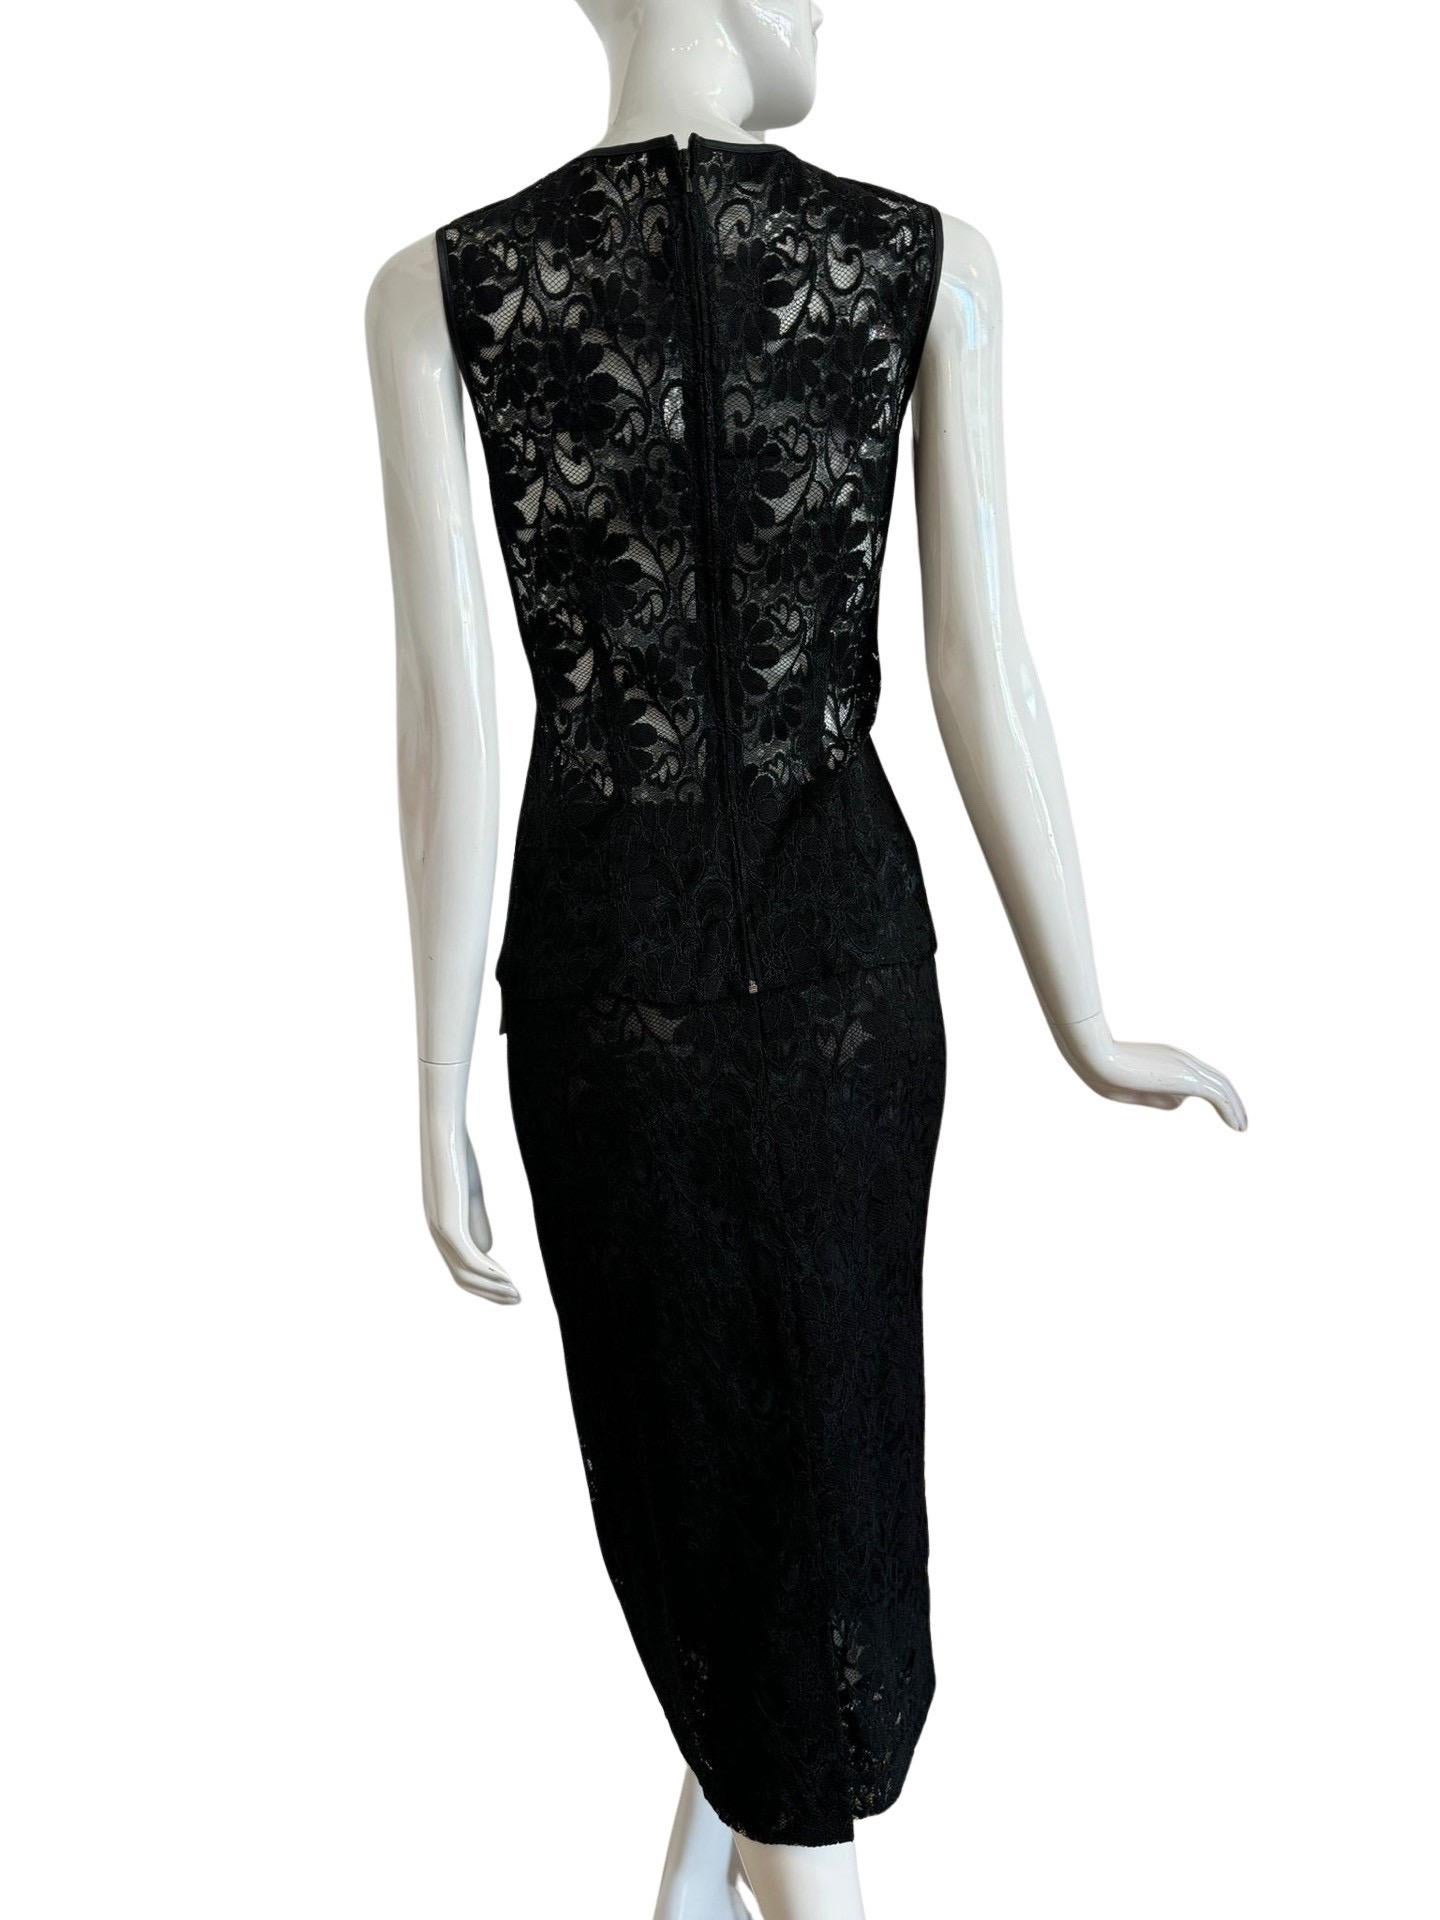 Dolce & Gabbana D&G label top and skirt black lace set. The top is a sleeveless shell and sheer with piping along the edges. It falls below the skirt line. The skirt is a pencil skirt past the knees and lined. Made in Italy and in excellent